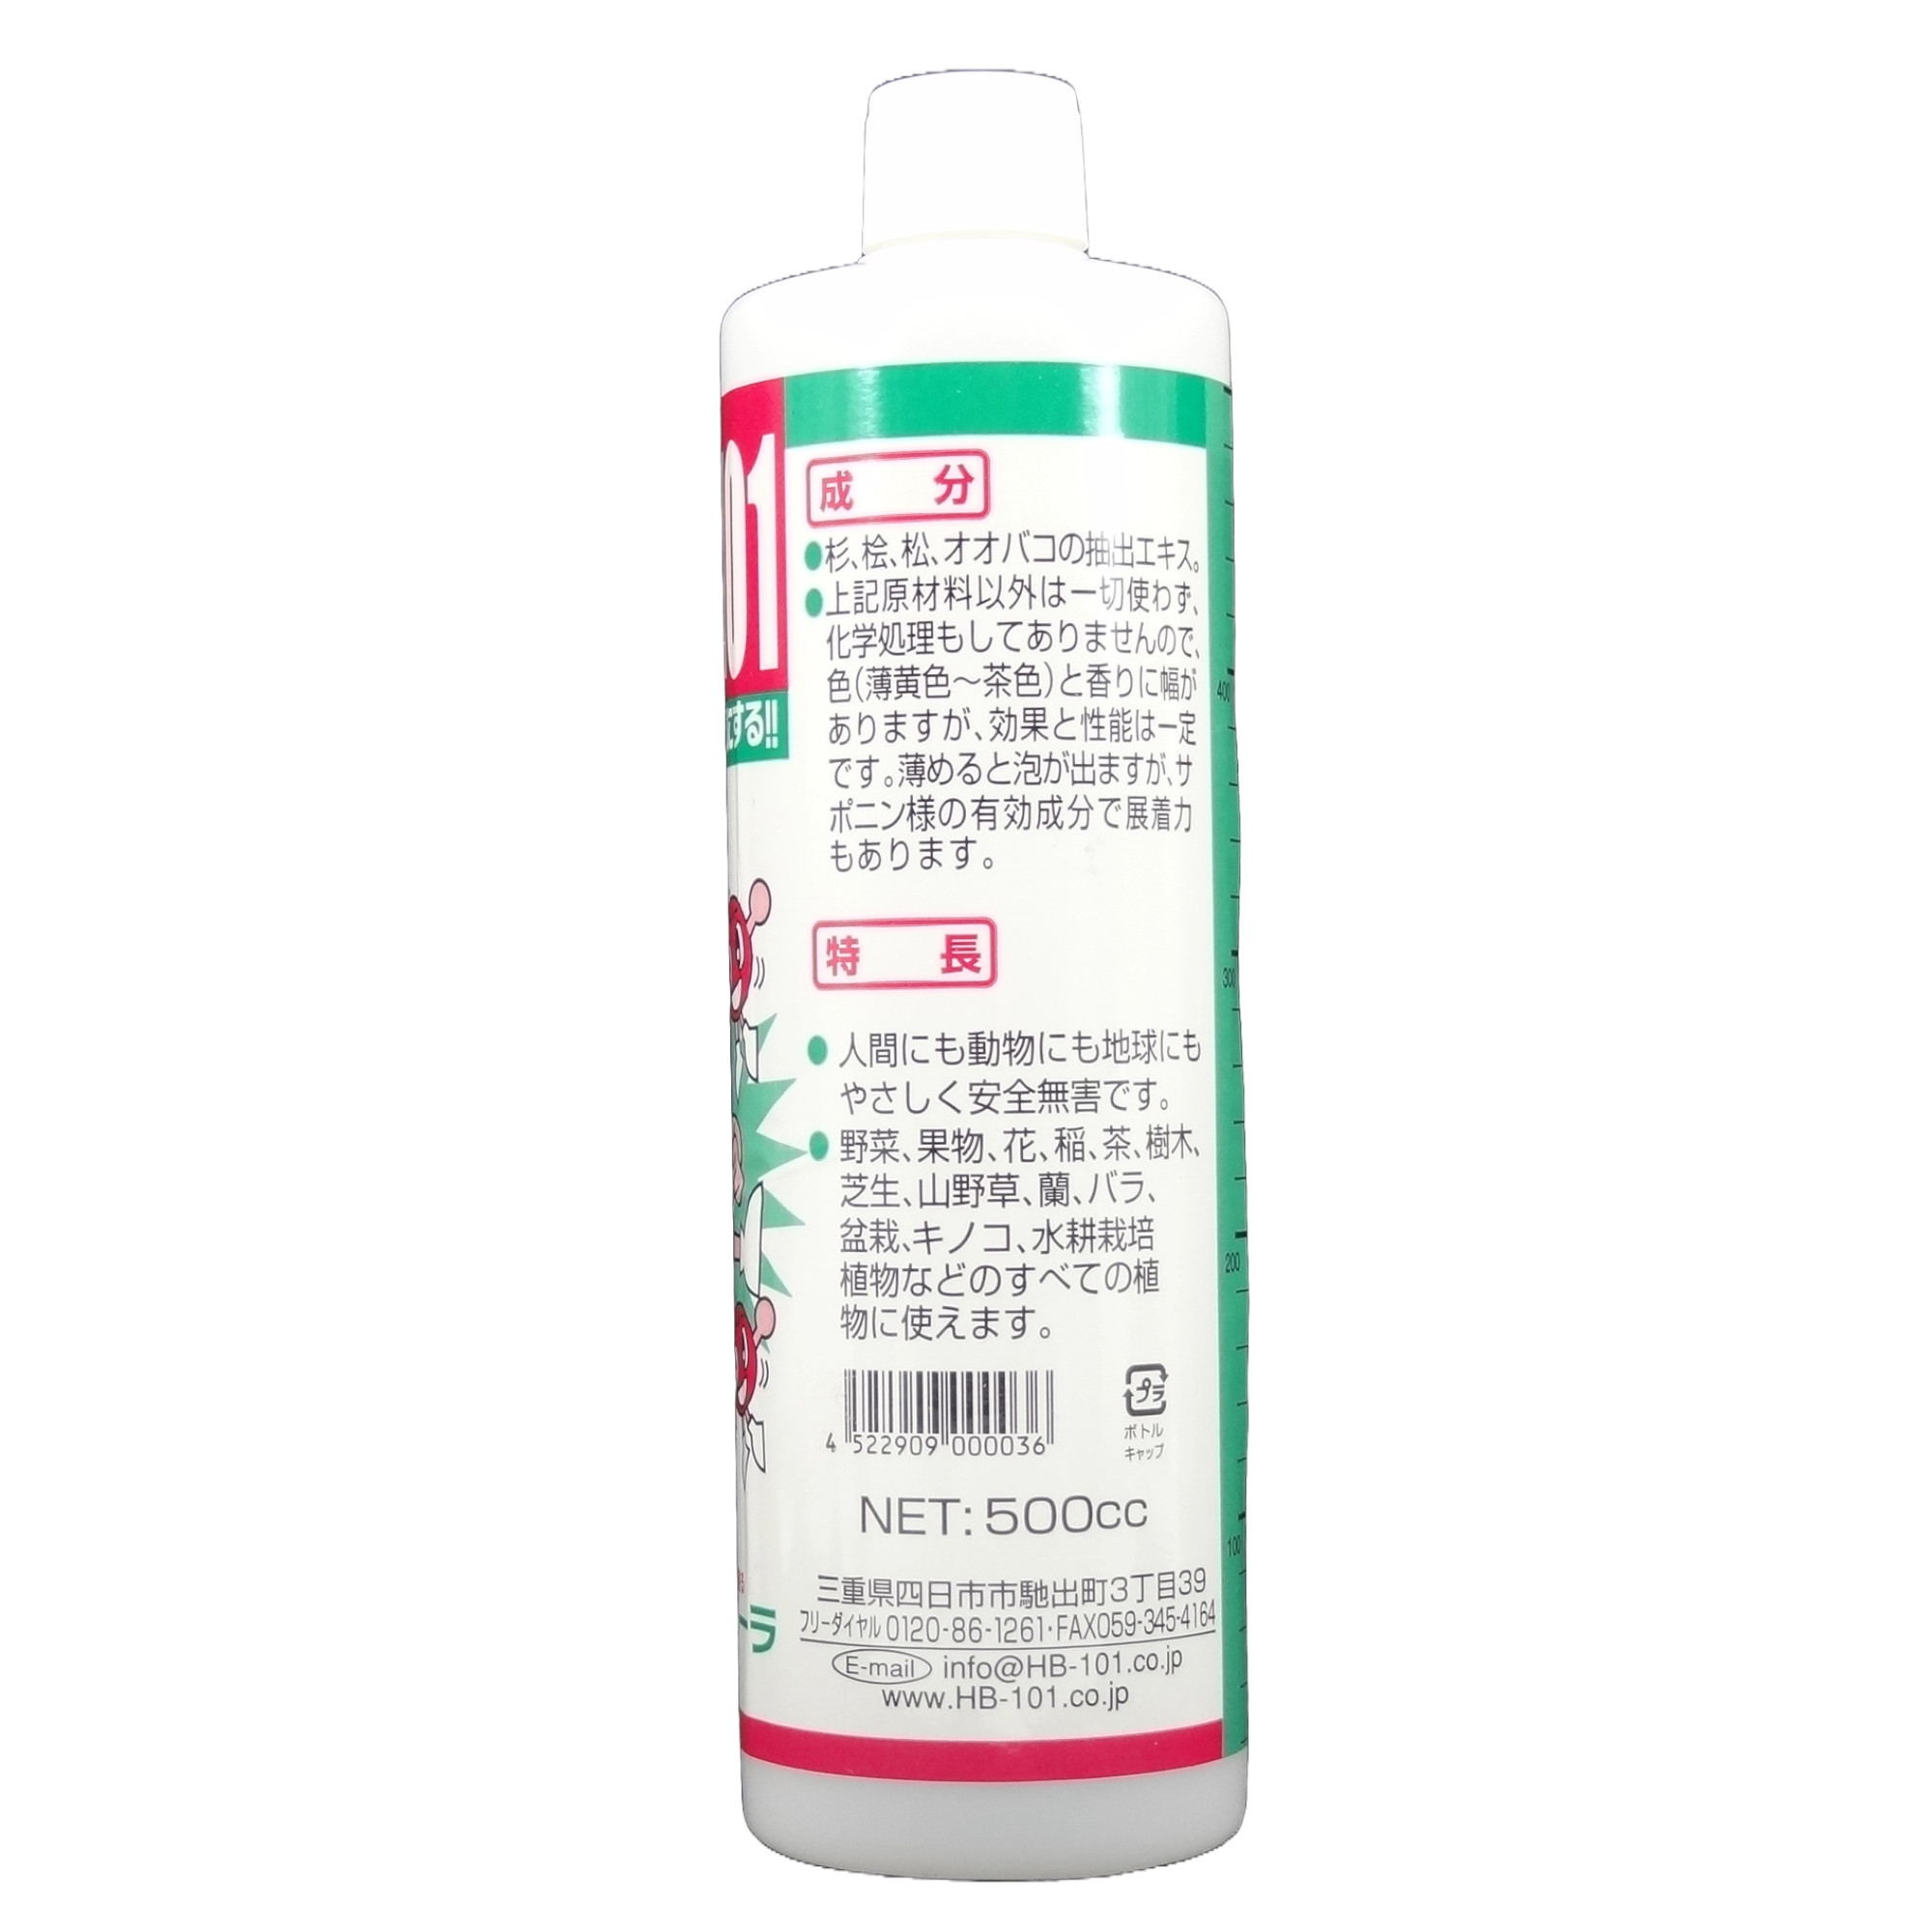  flora HB-101 100cc 100ml Pro . for . vegetable . super origin .. now only present attaching .